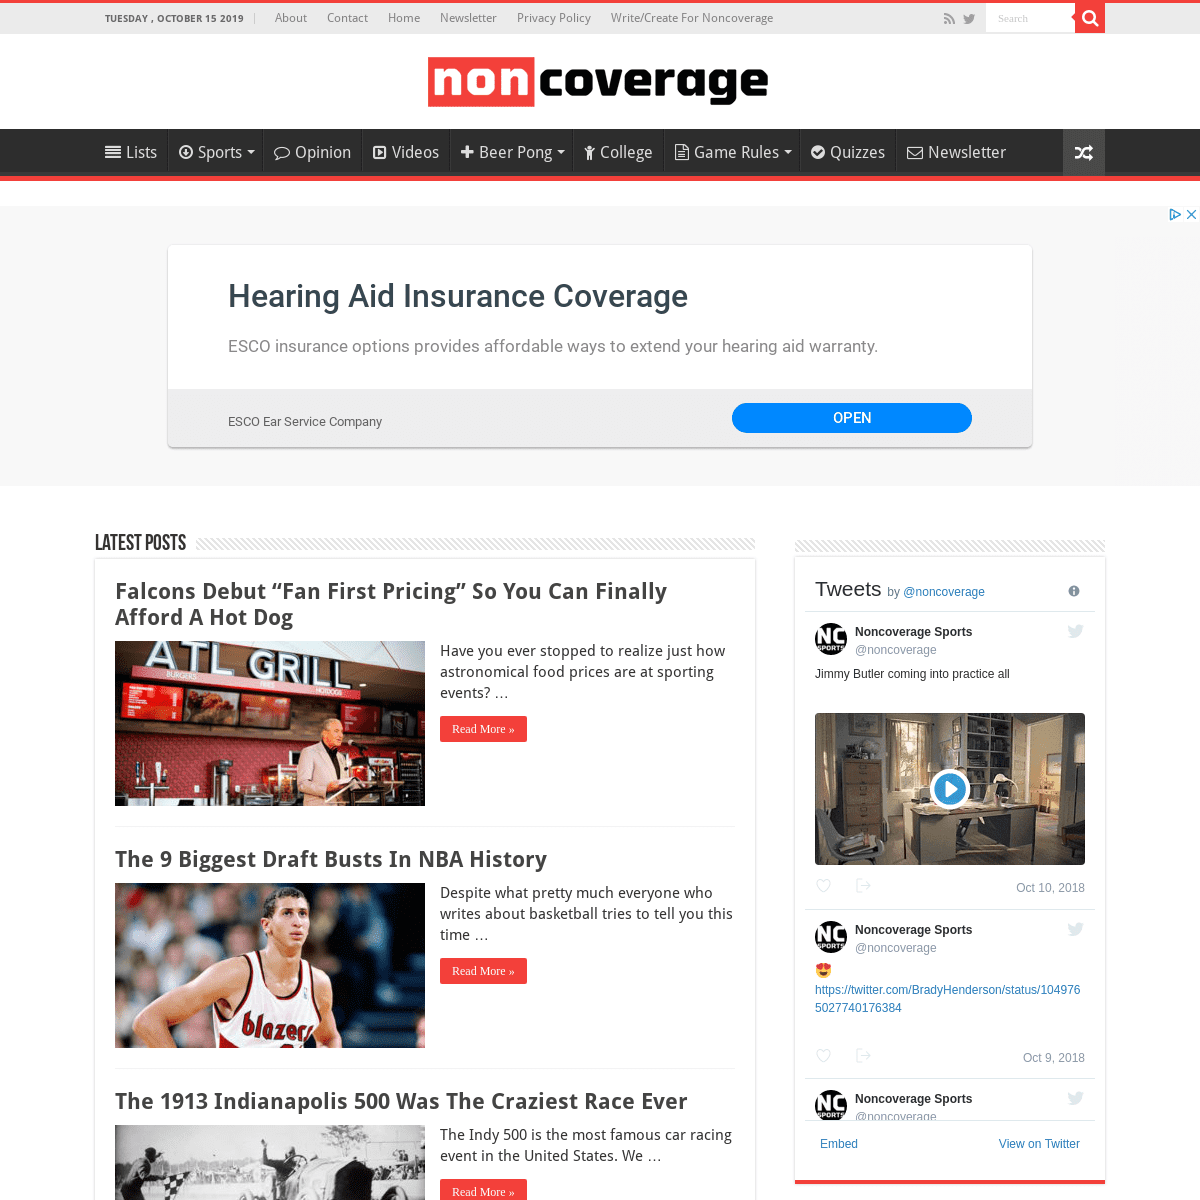 A complete backup of noncoveragesports.com